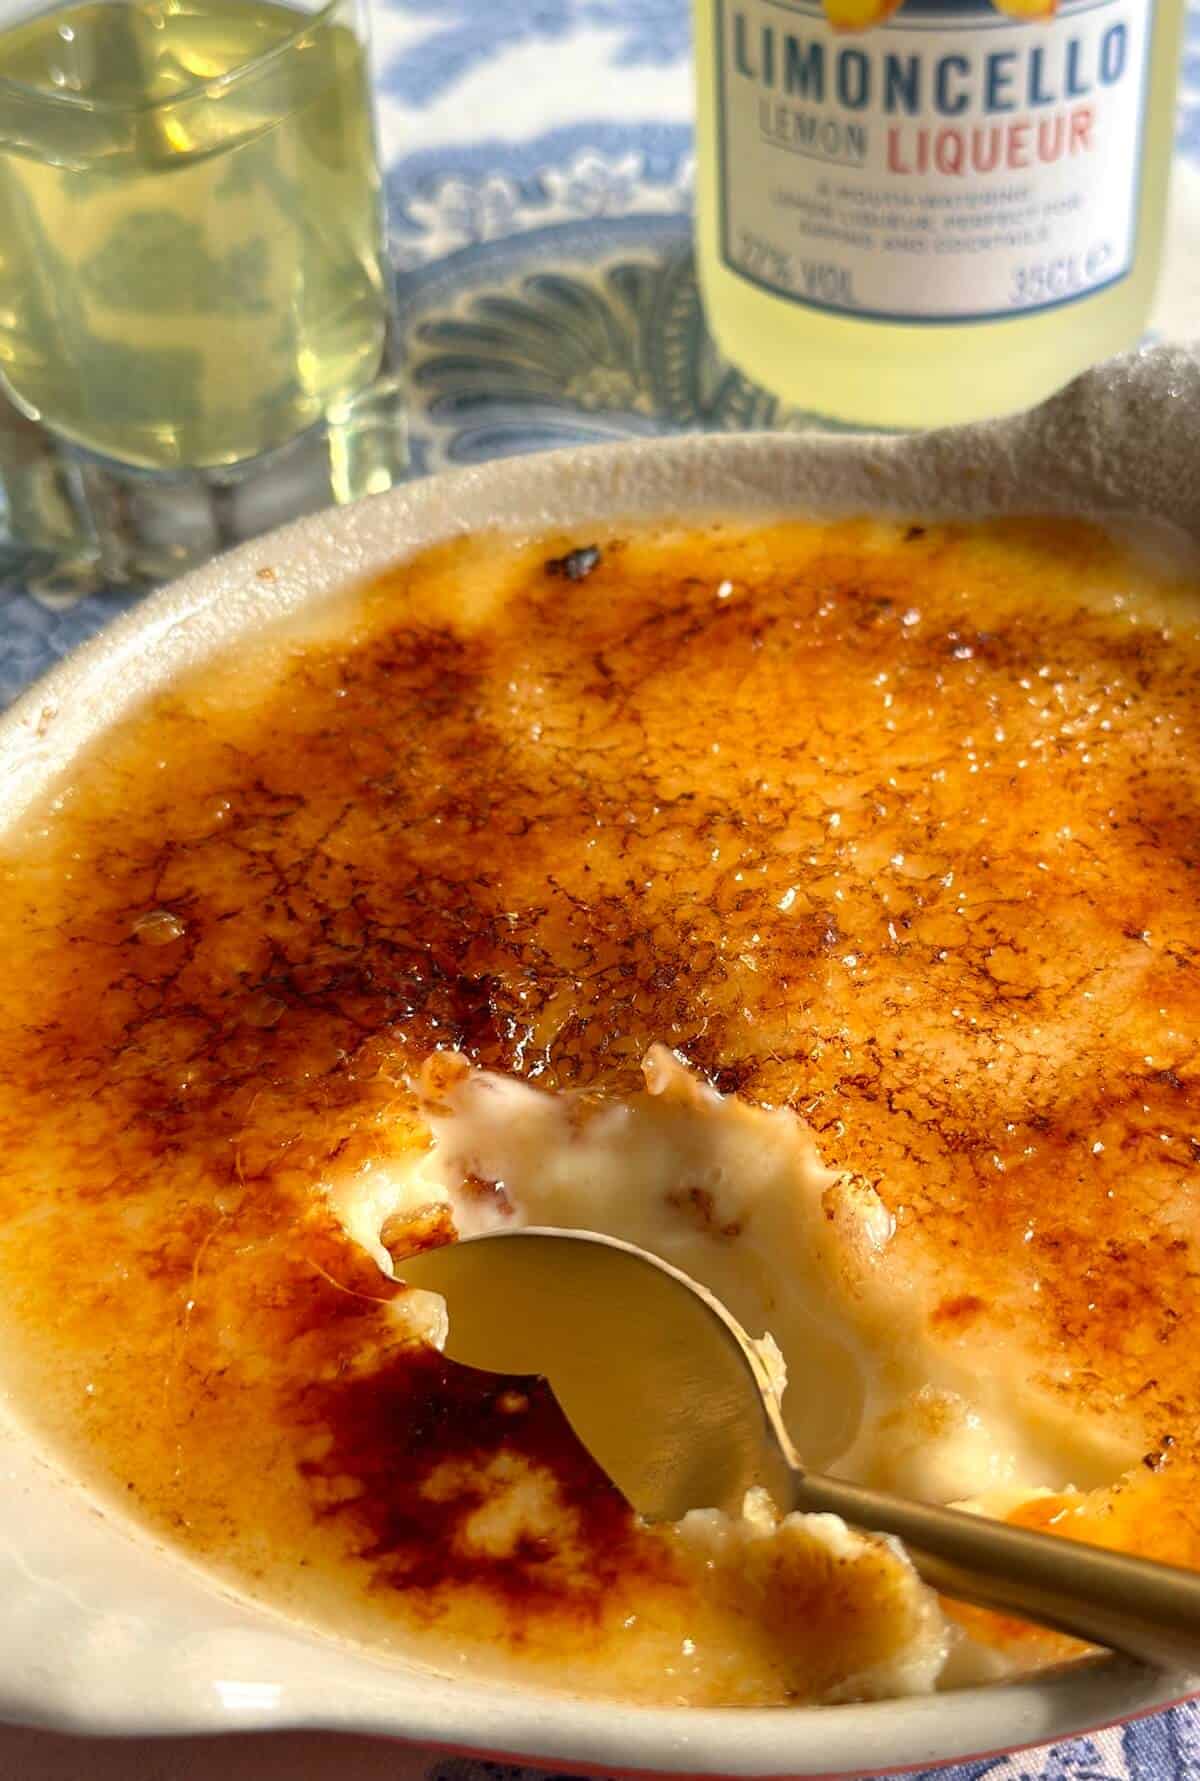 A shallow ramekin of Limoncello creme brulee next to a bottle and glass of Limoncello liqueur. 